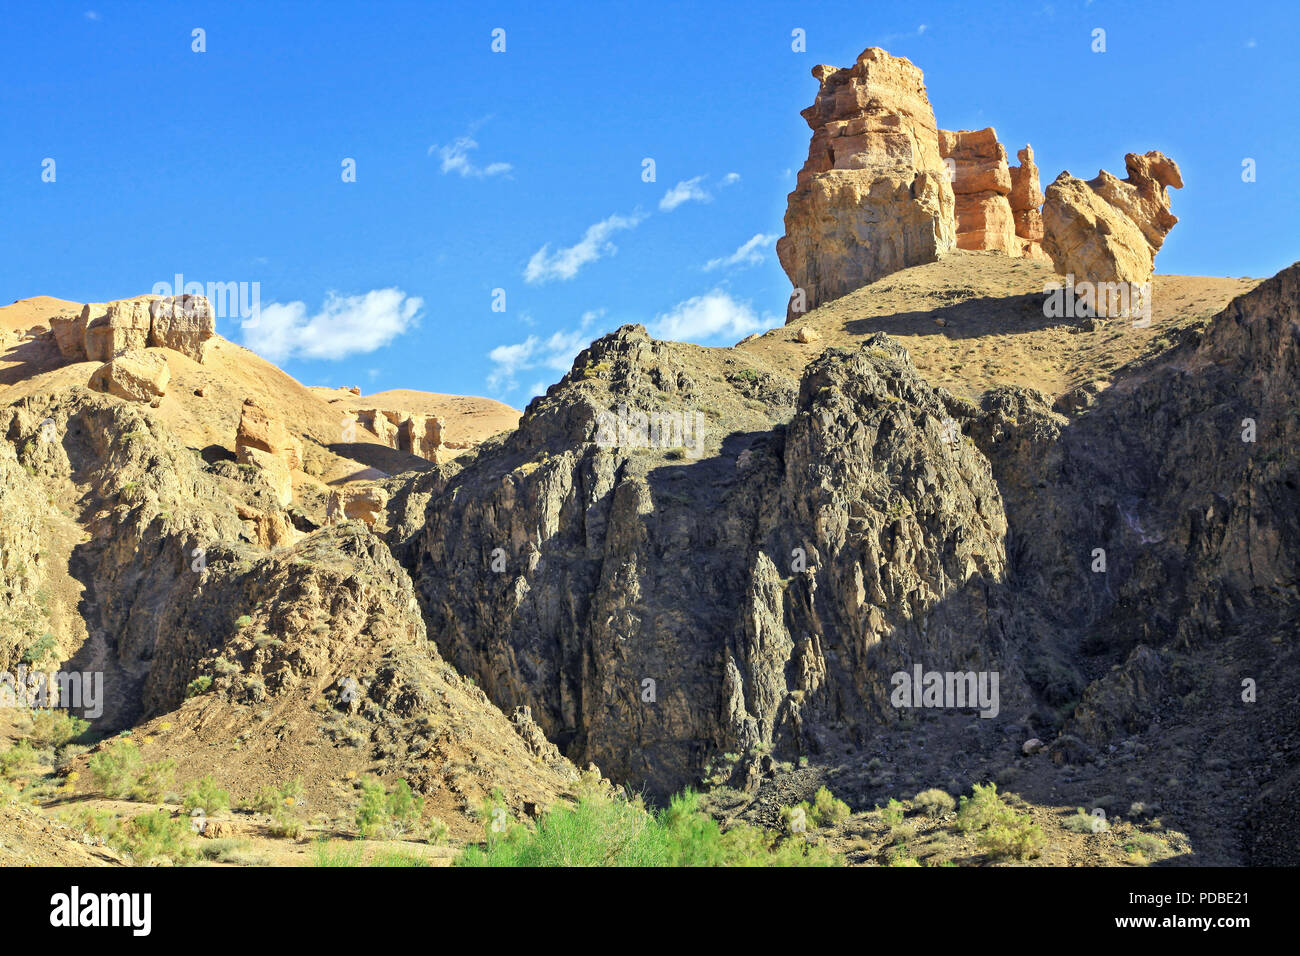 Unusual sculptural forms of the Charyn canyon. Outskirts of Almaty, Kazakhstan Stock Photo